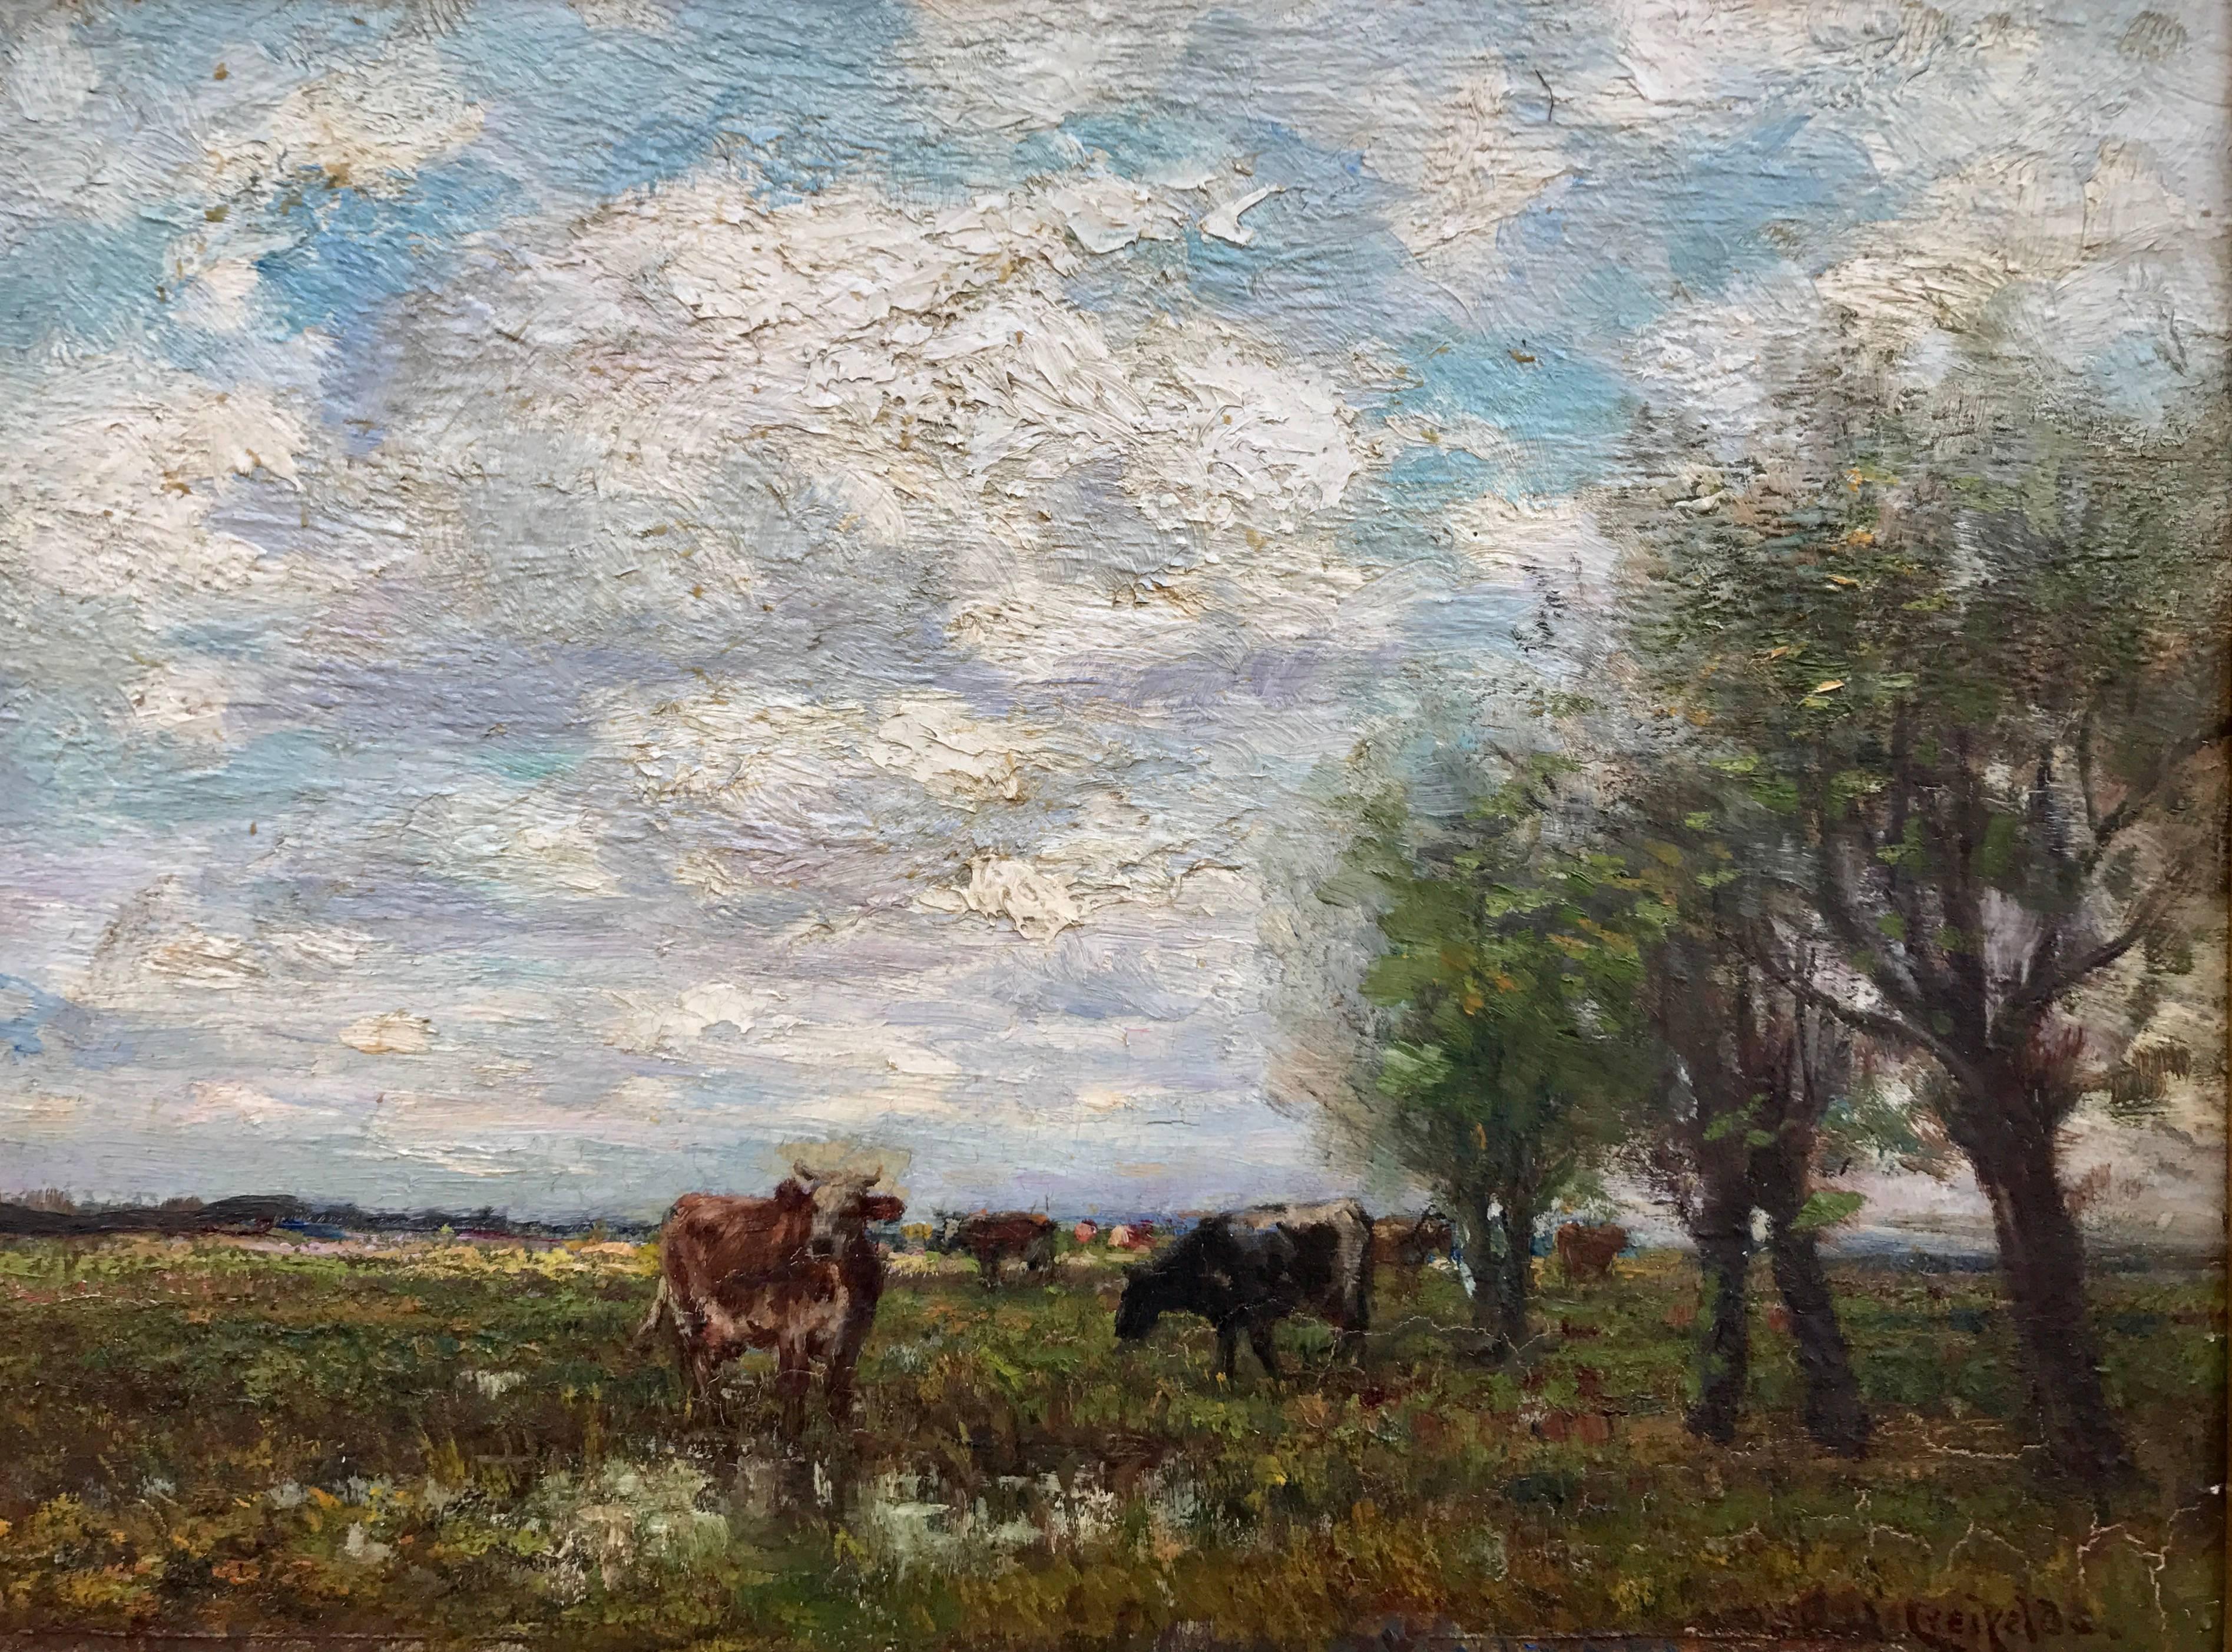 Richard Creifelds Landscape Painting - "Cows at Watering Hole"